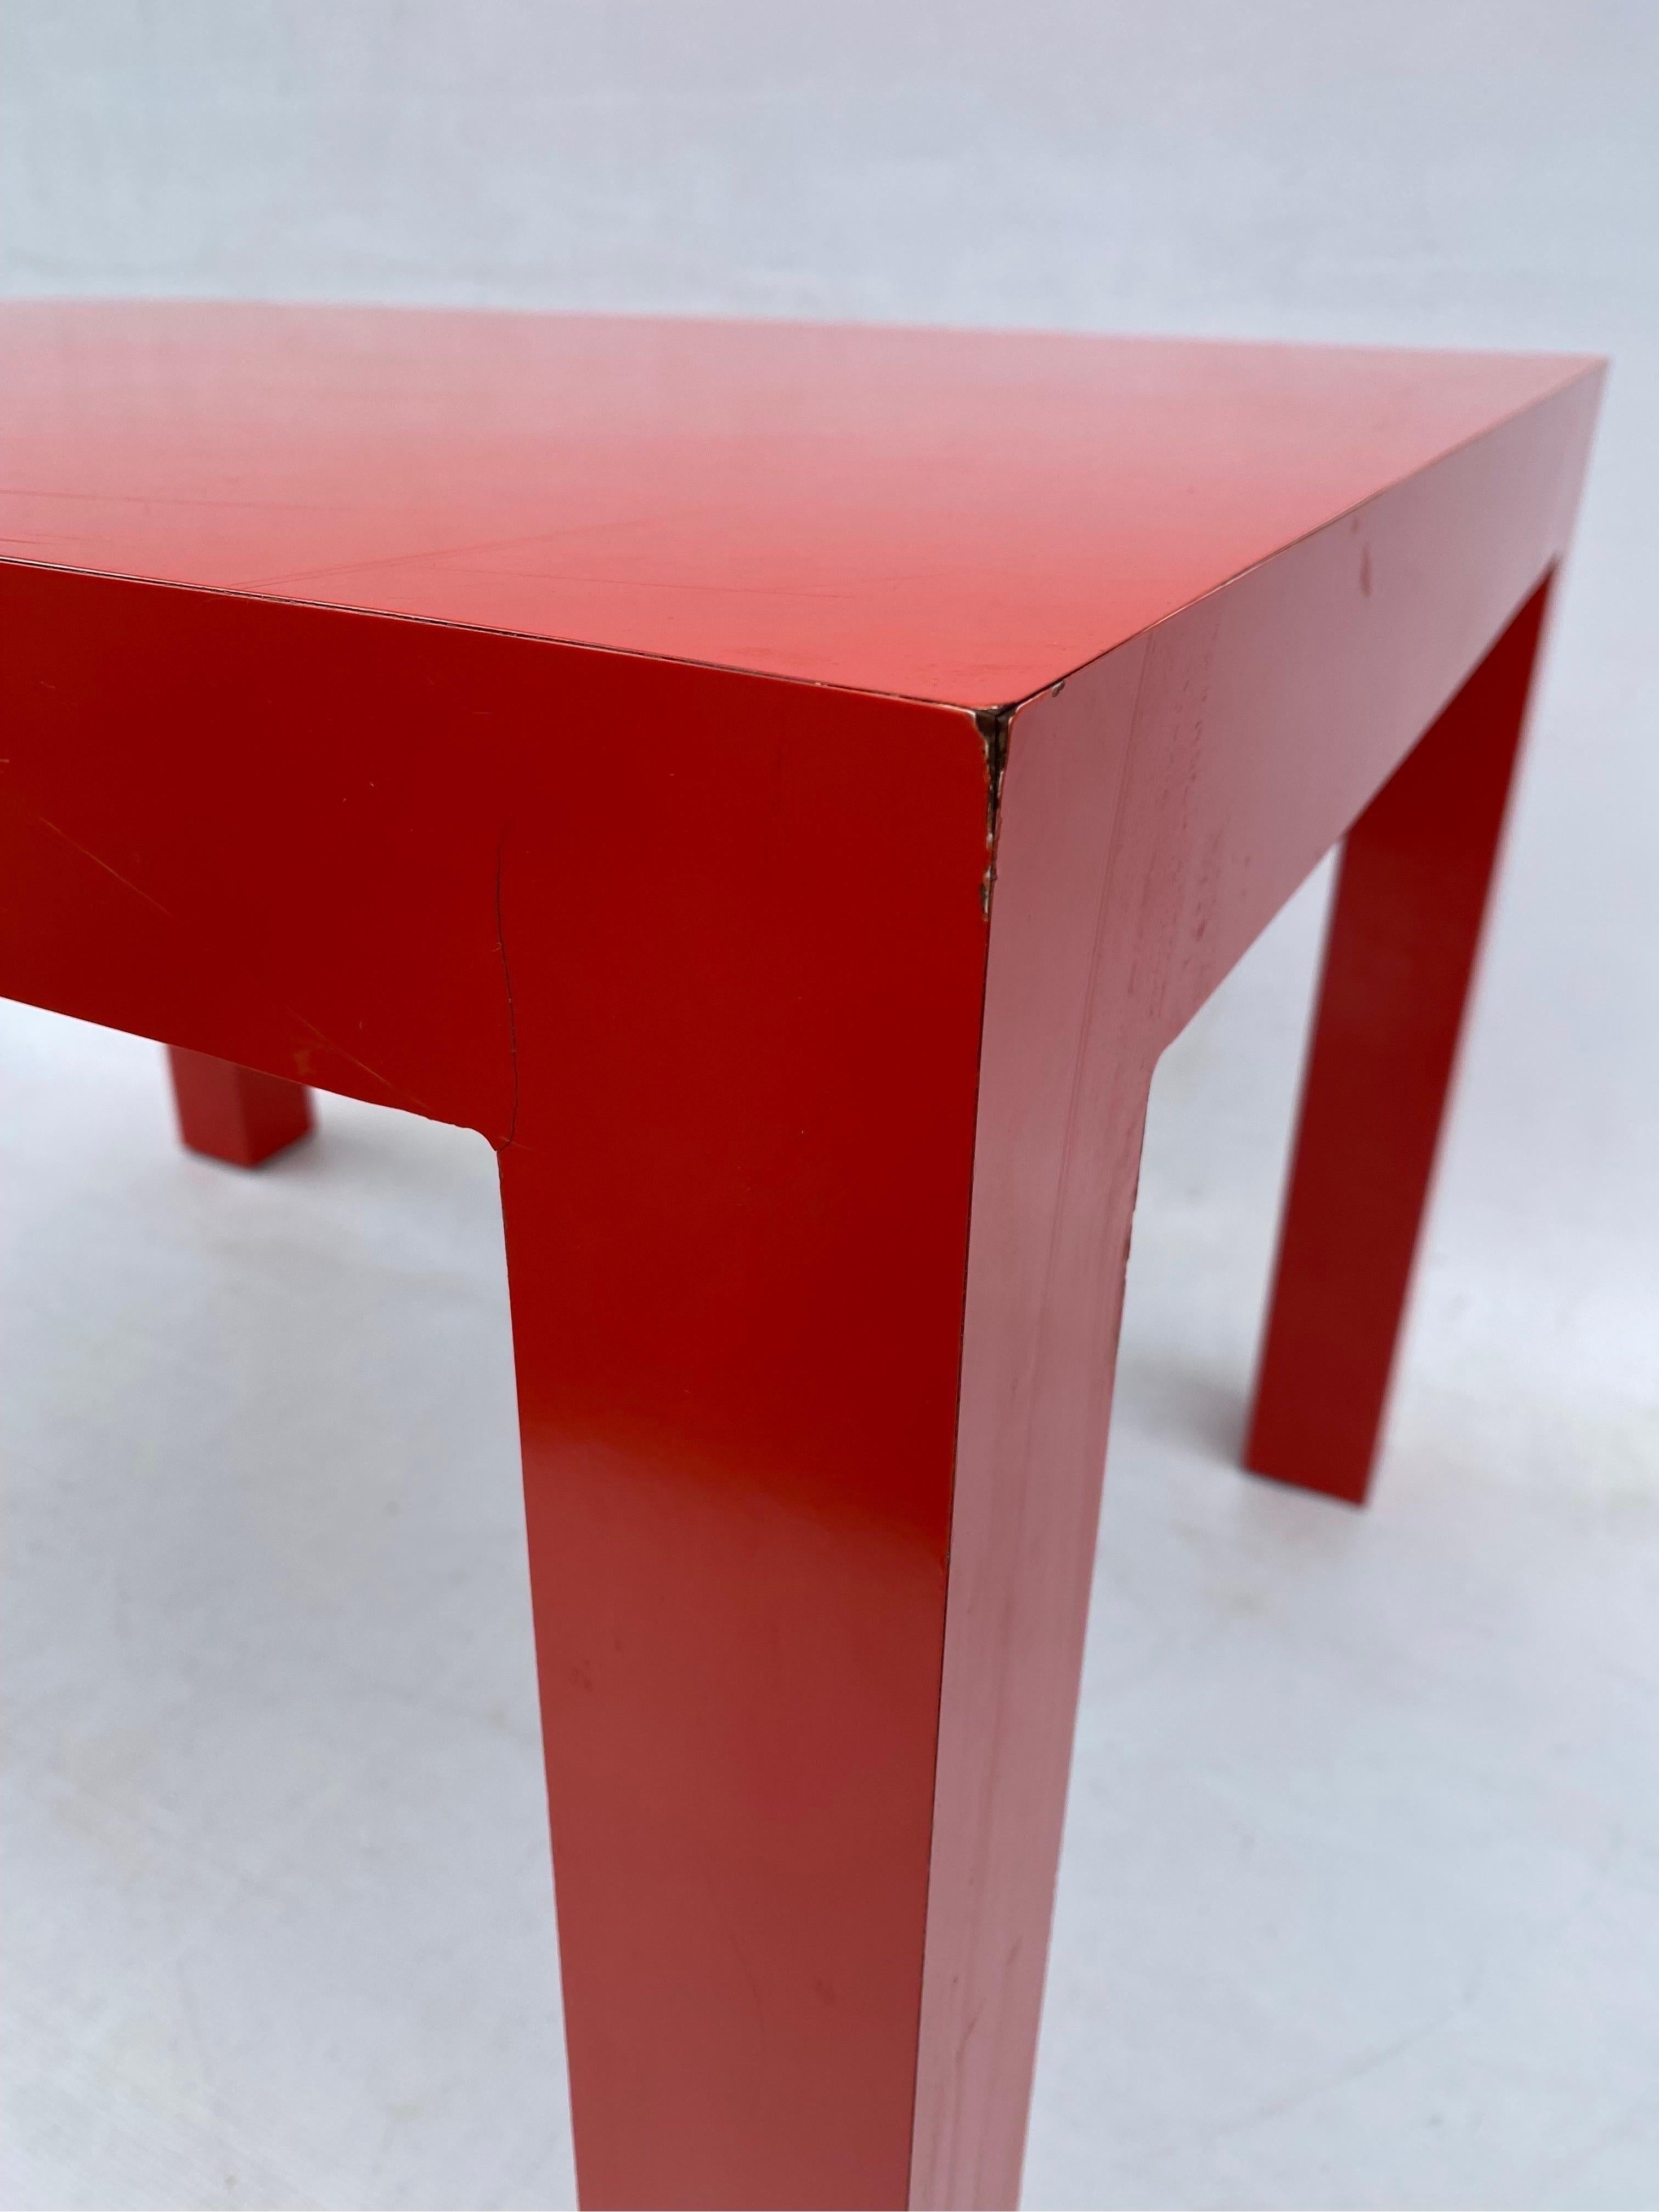 Milo Baughman for Thayer Coggin Formica Red Side Coffee Table 1960s Mid Century  For Sale 5